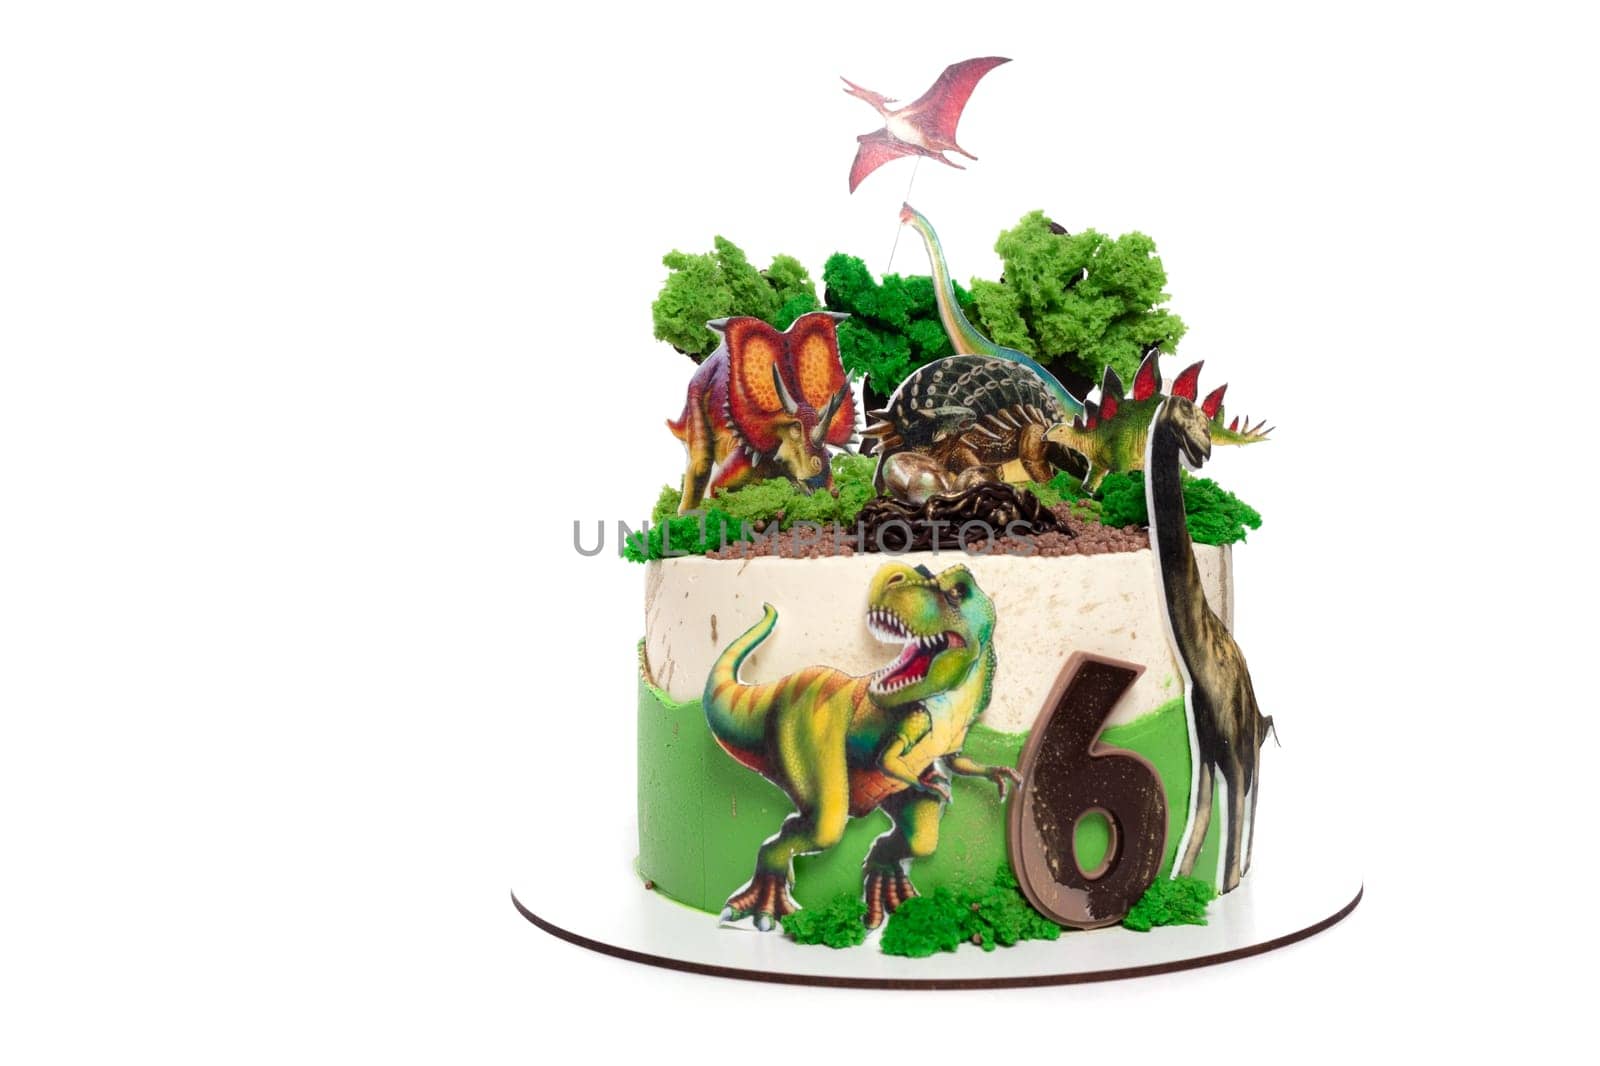 This birthday cake is decorated with colorful dinosaurs and birds. The dinosaurs are roaring and the birds are flying around them. The cake is a vibrant display of prehistoric and avian themes.